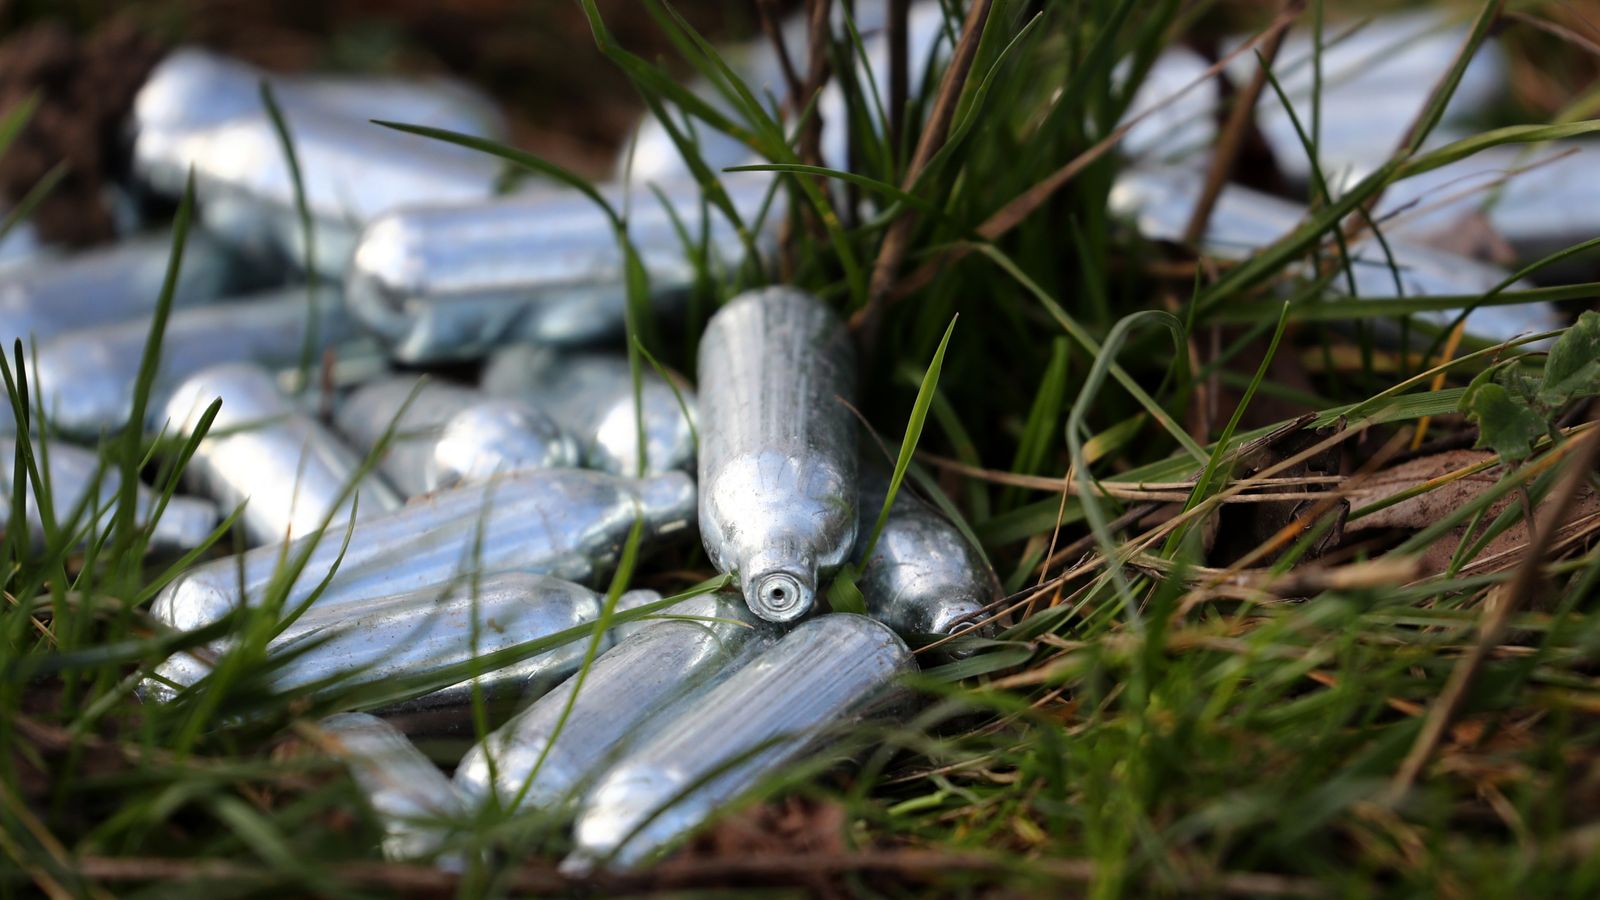 Nitrous oxide: Laughing gas to become illegal next month - as dealers face 14 years in jail